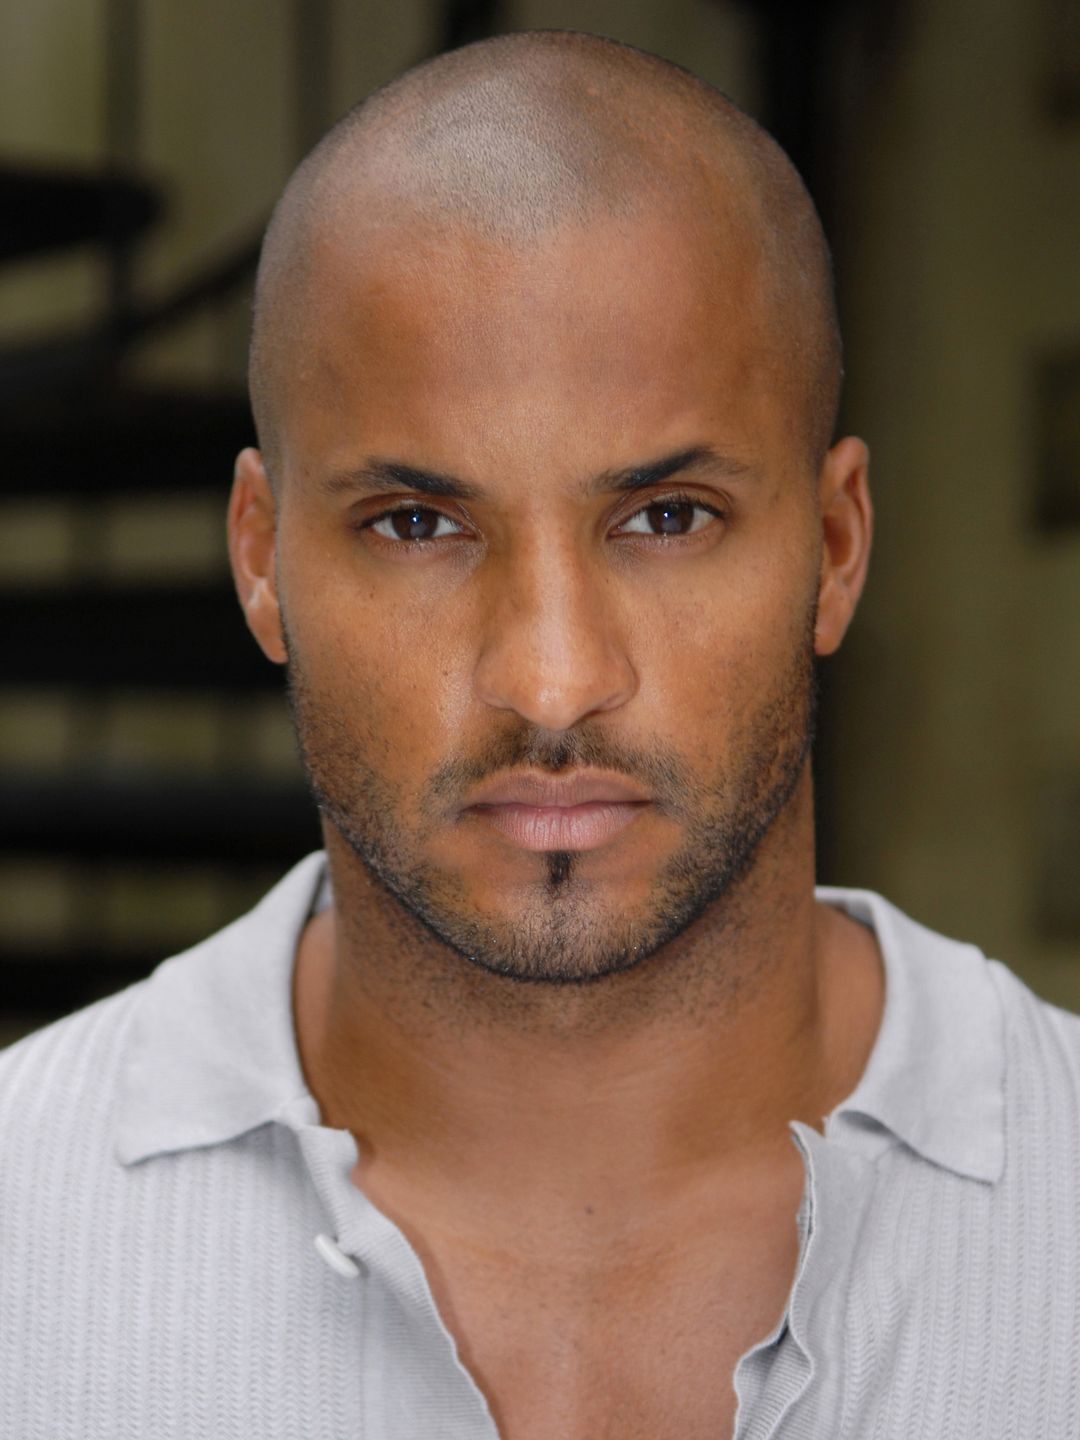 Ricky Whittle young age